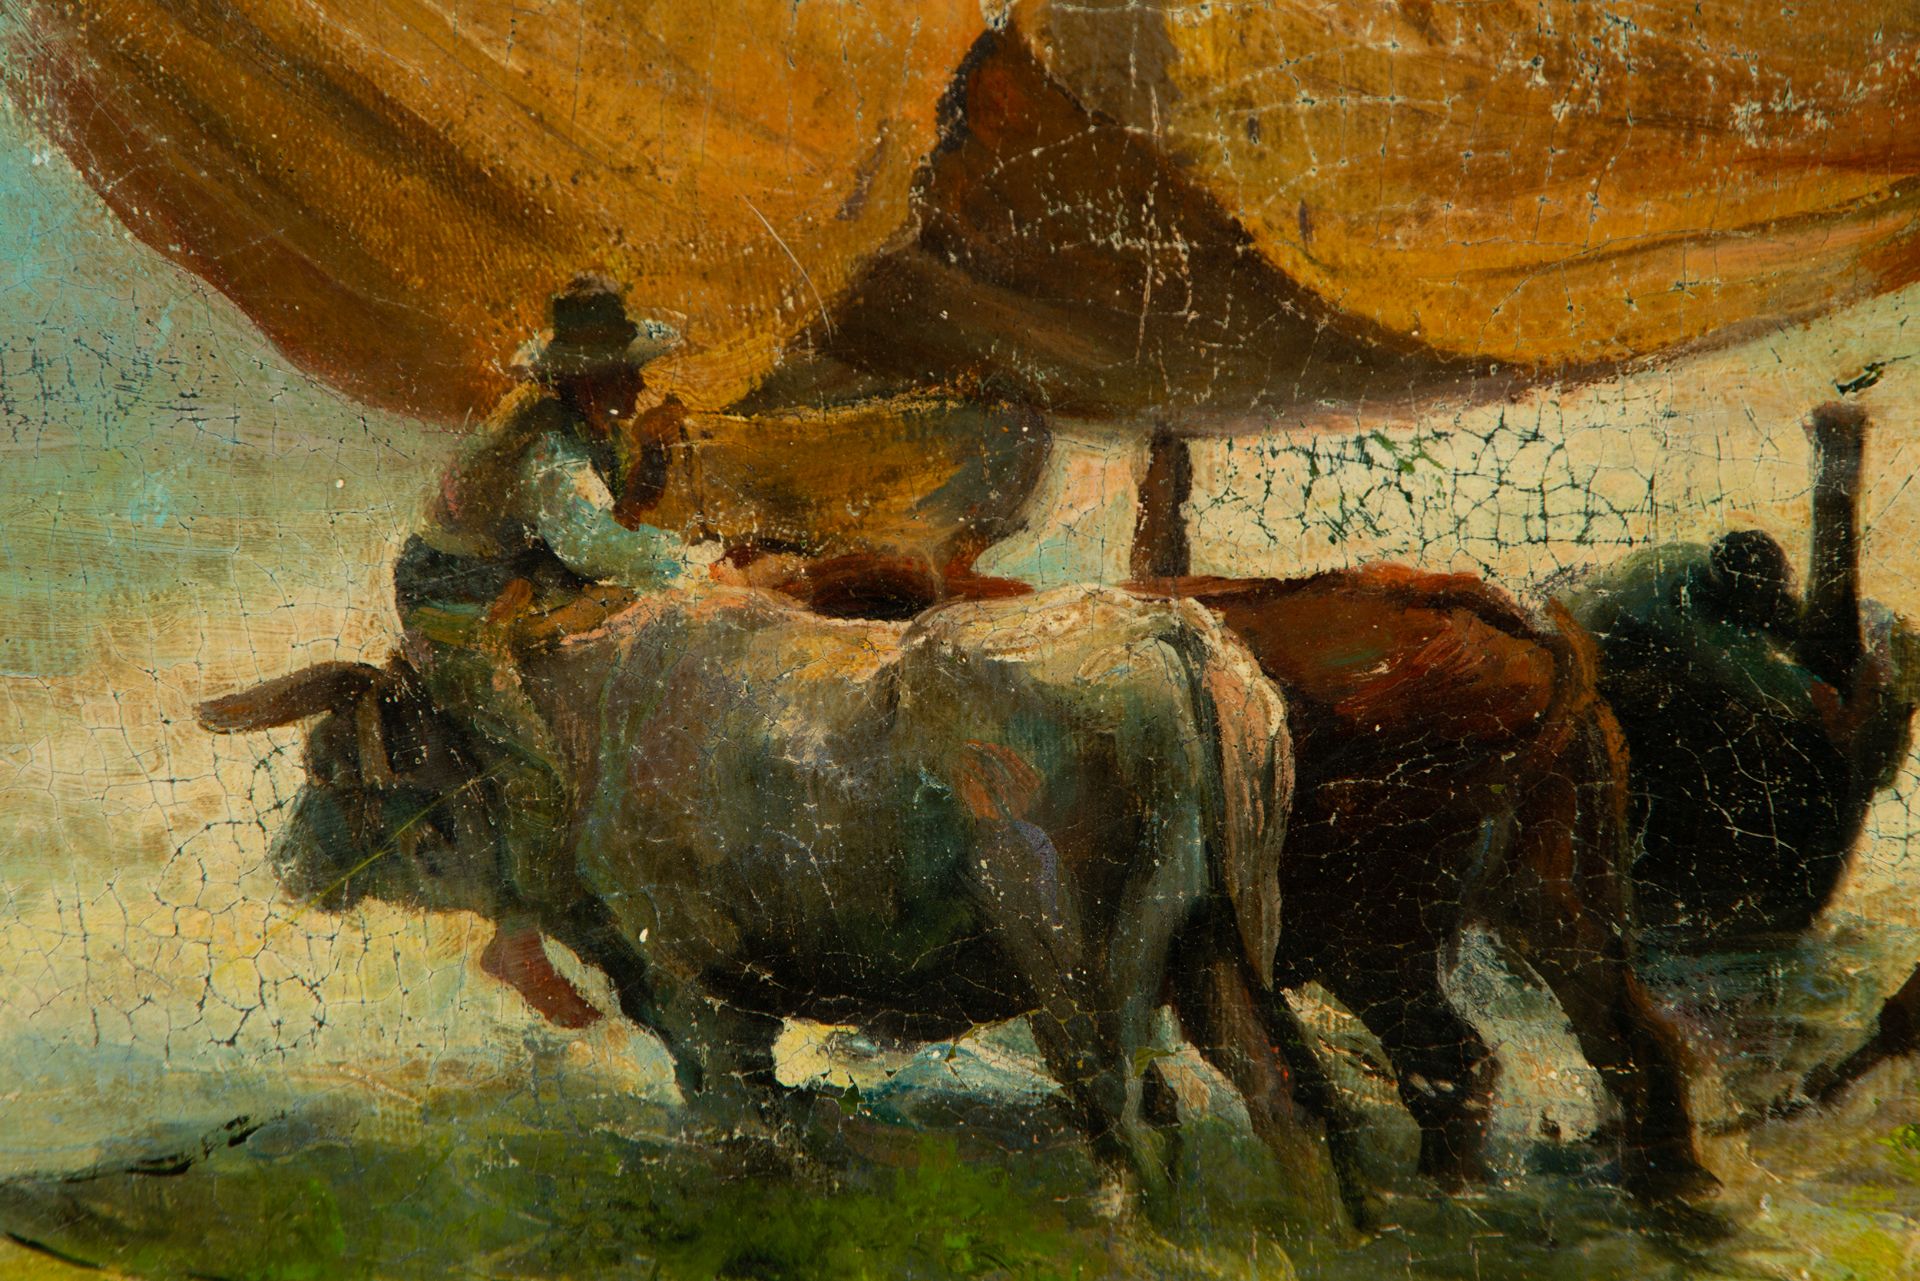 Buffaloes Plowing, Valencian school of the 19th century - Image 3 of 4